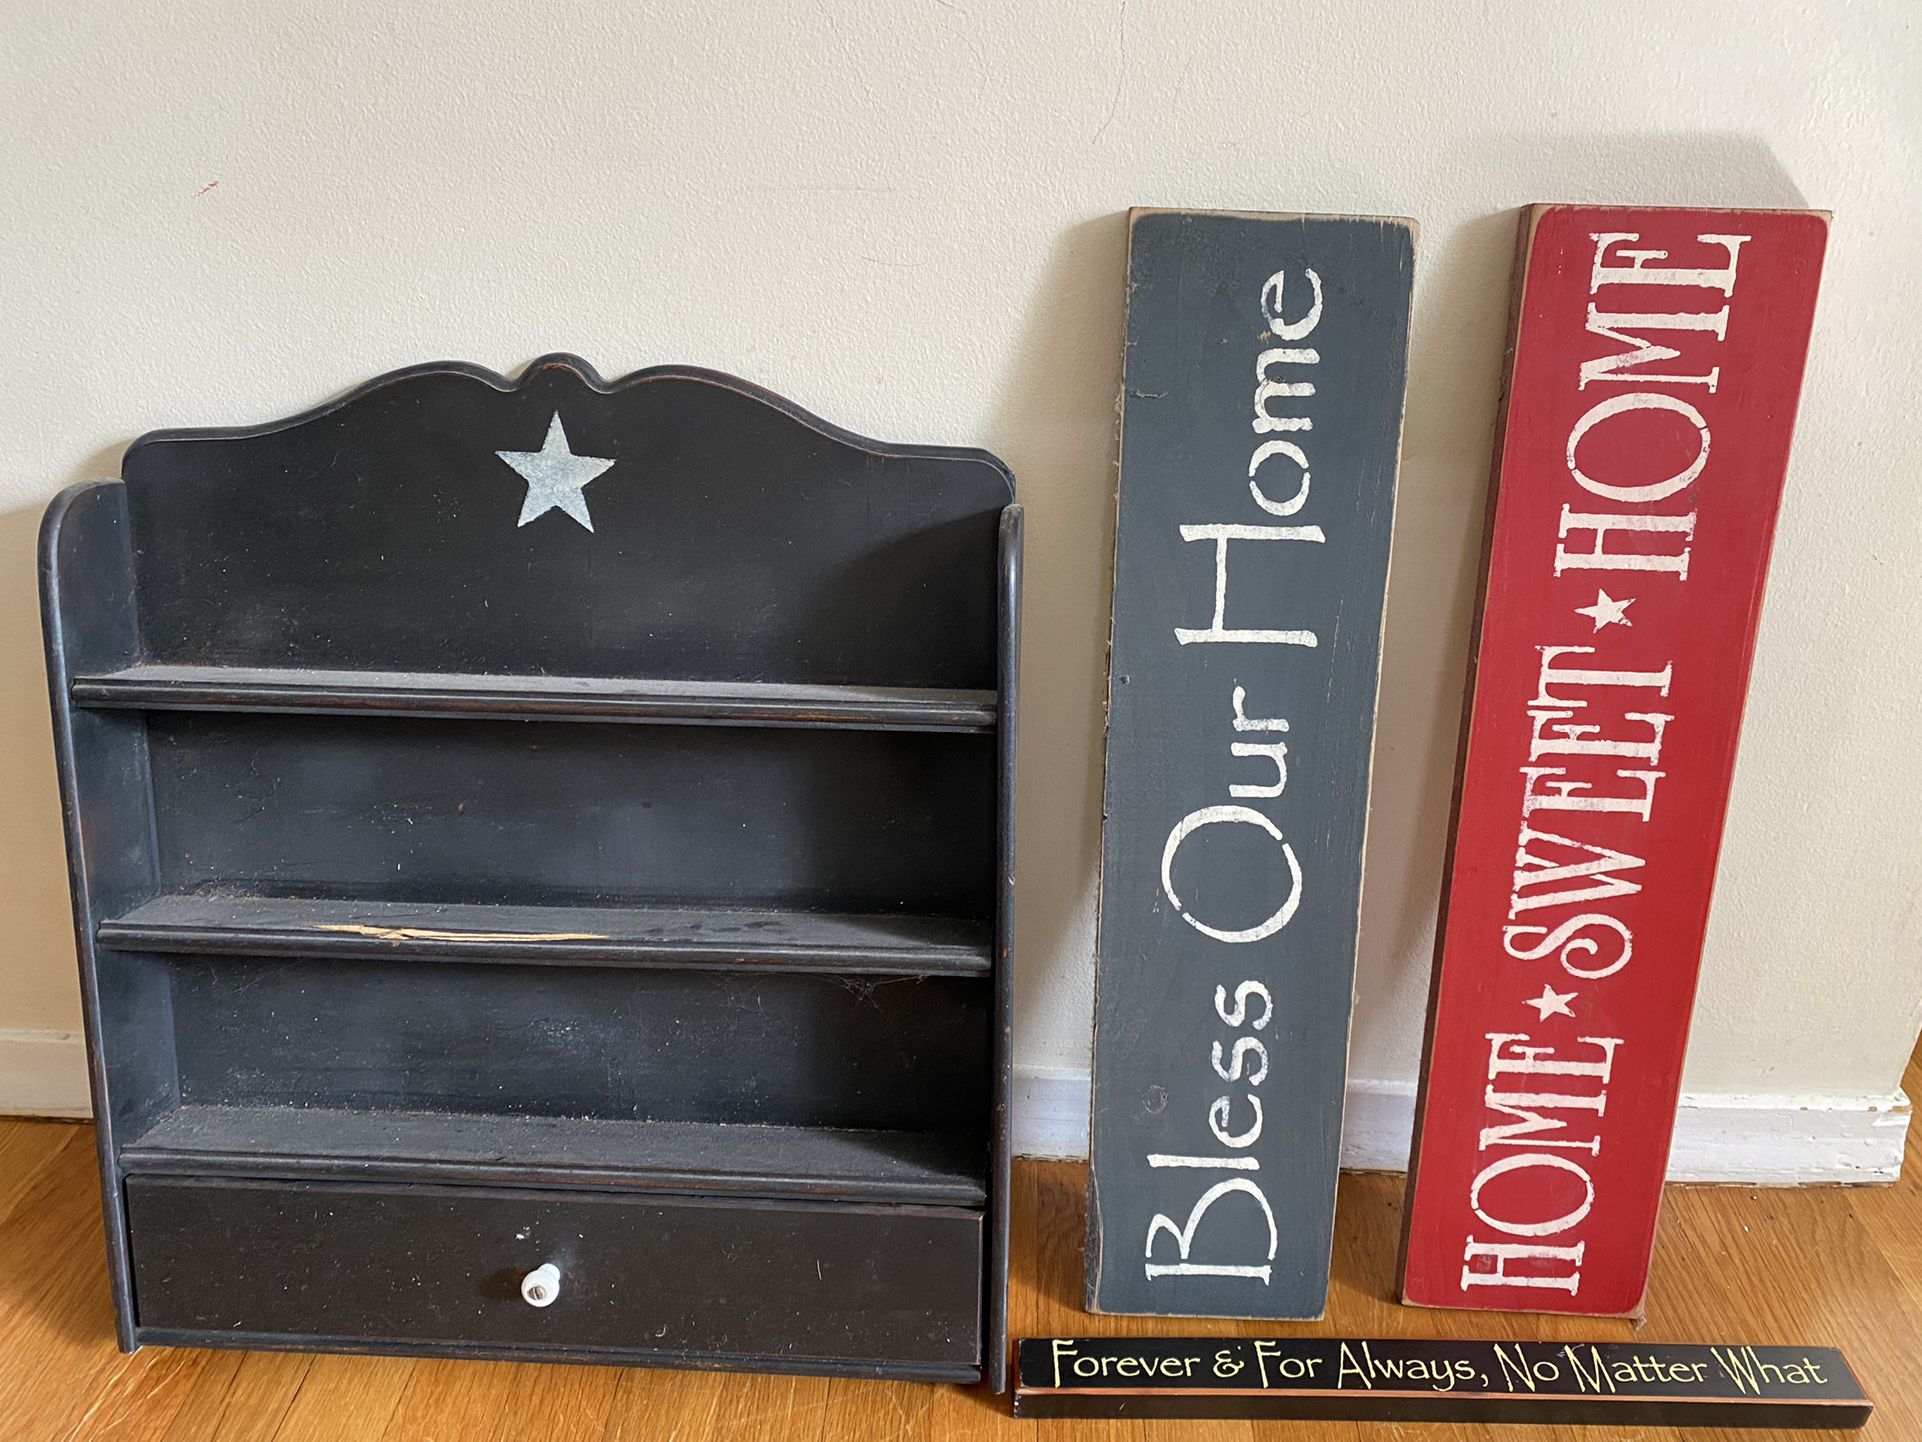 Spice Shelf, Home Decor Signs, Red White And Blue, Americana Style Home Decor